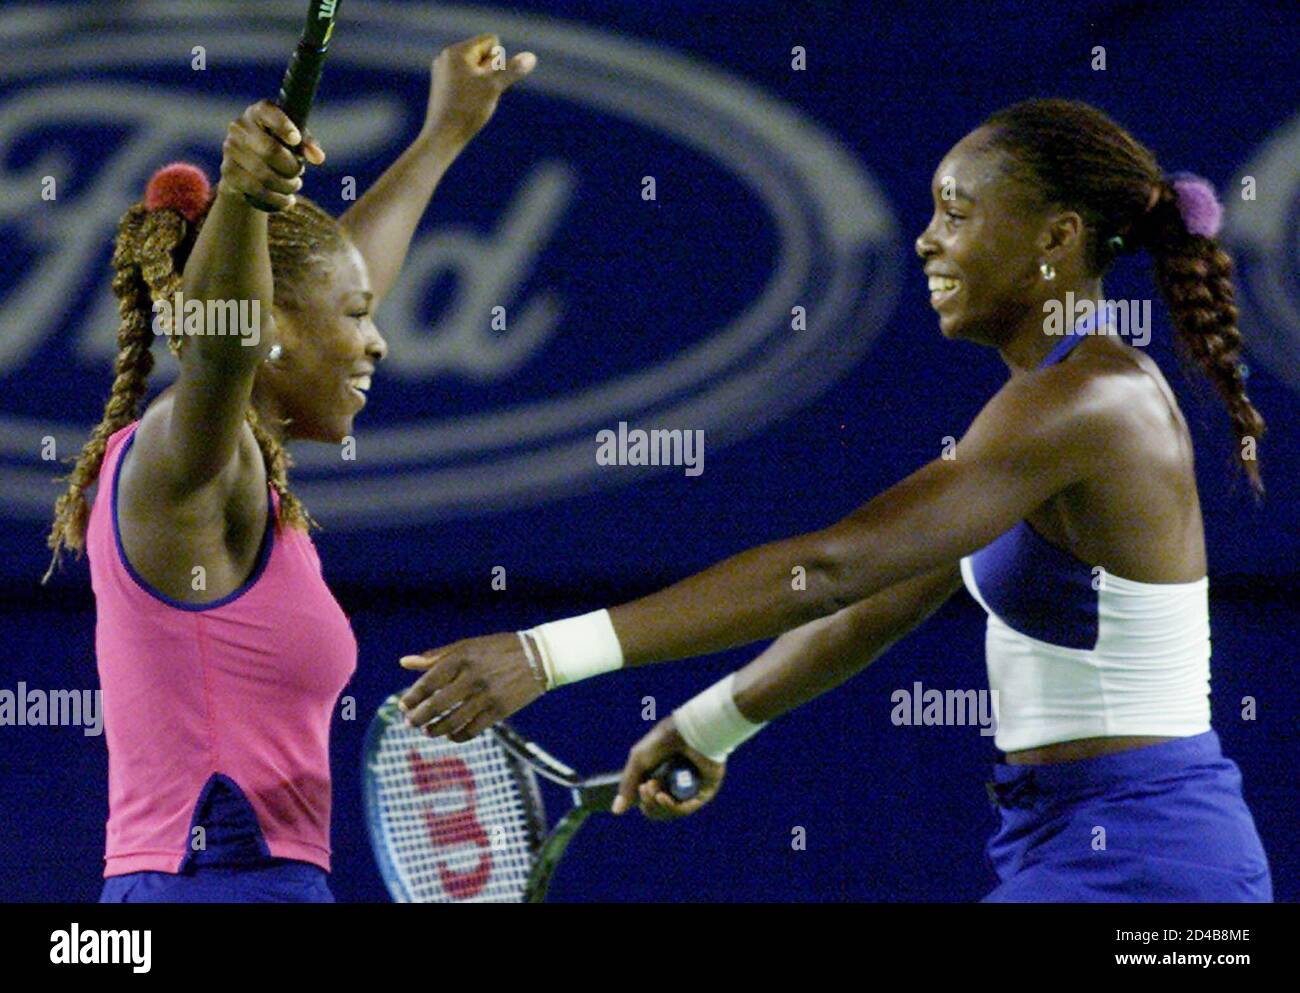 The United States pair of Serena Williams (L) and her sister Venus run into  each others arms as they celebrate their win in the Women's Doubles final  against compatriots Lindsay Davenport and